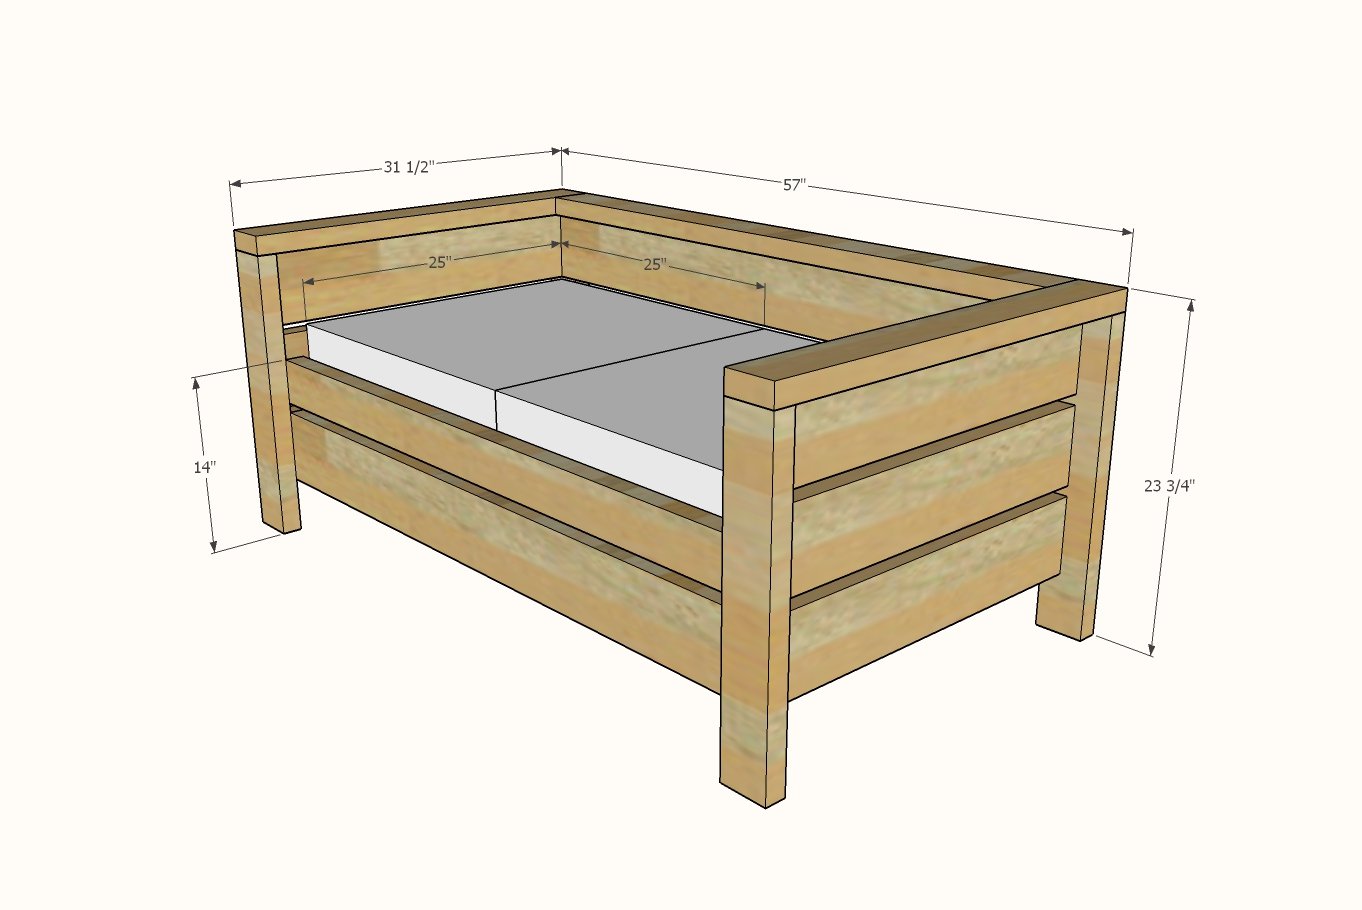 dimensions of modern outdoor loveseat